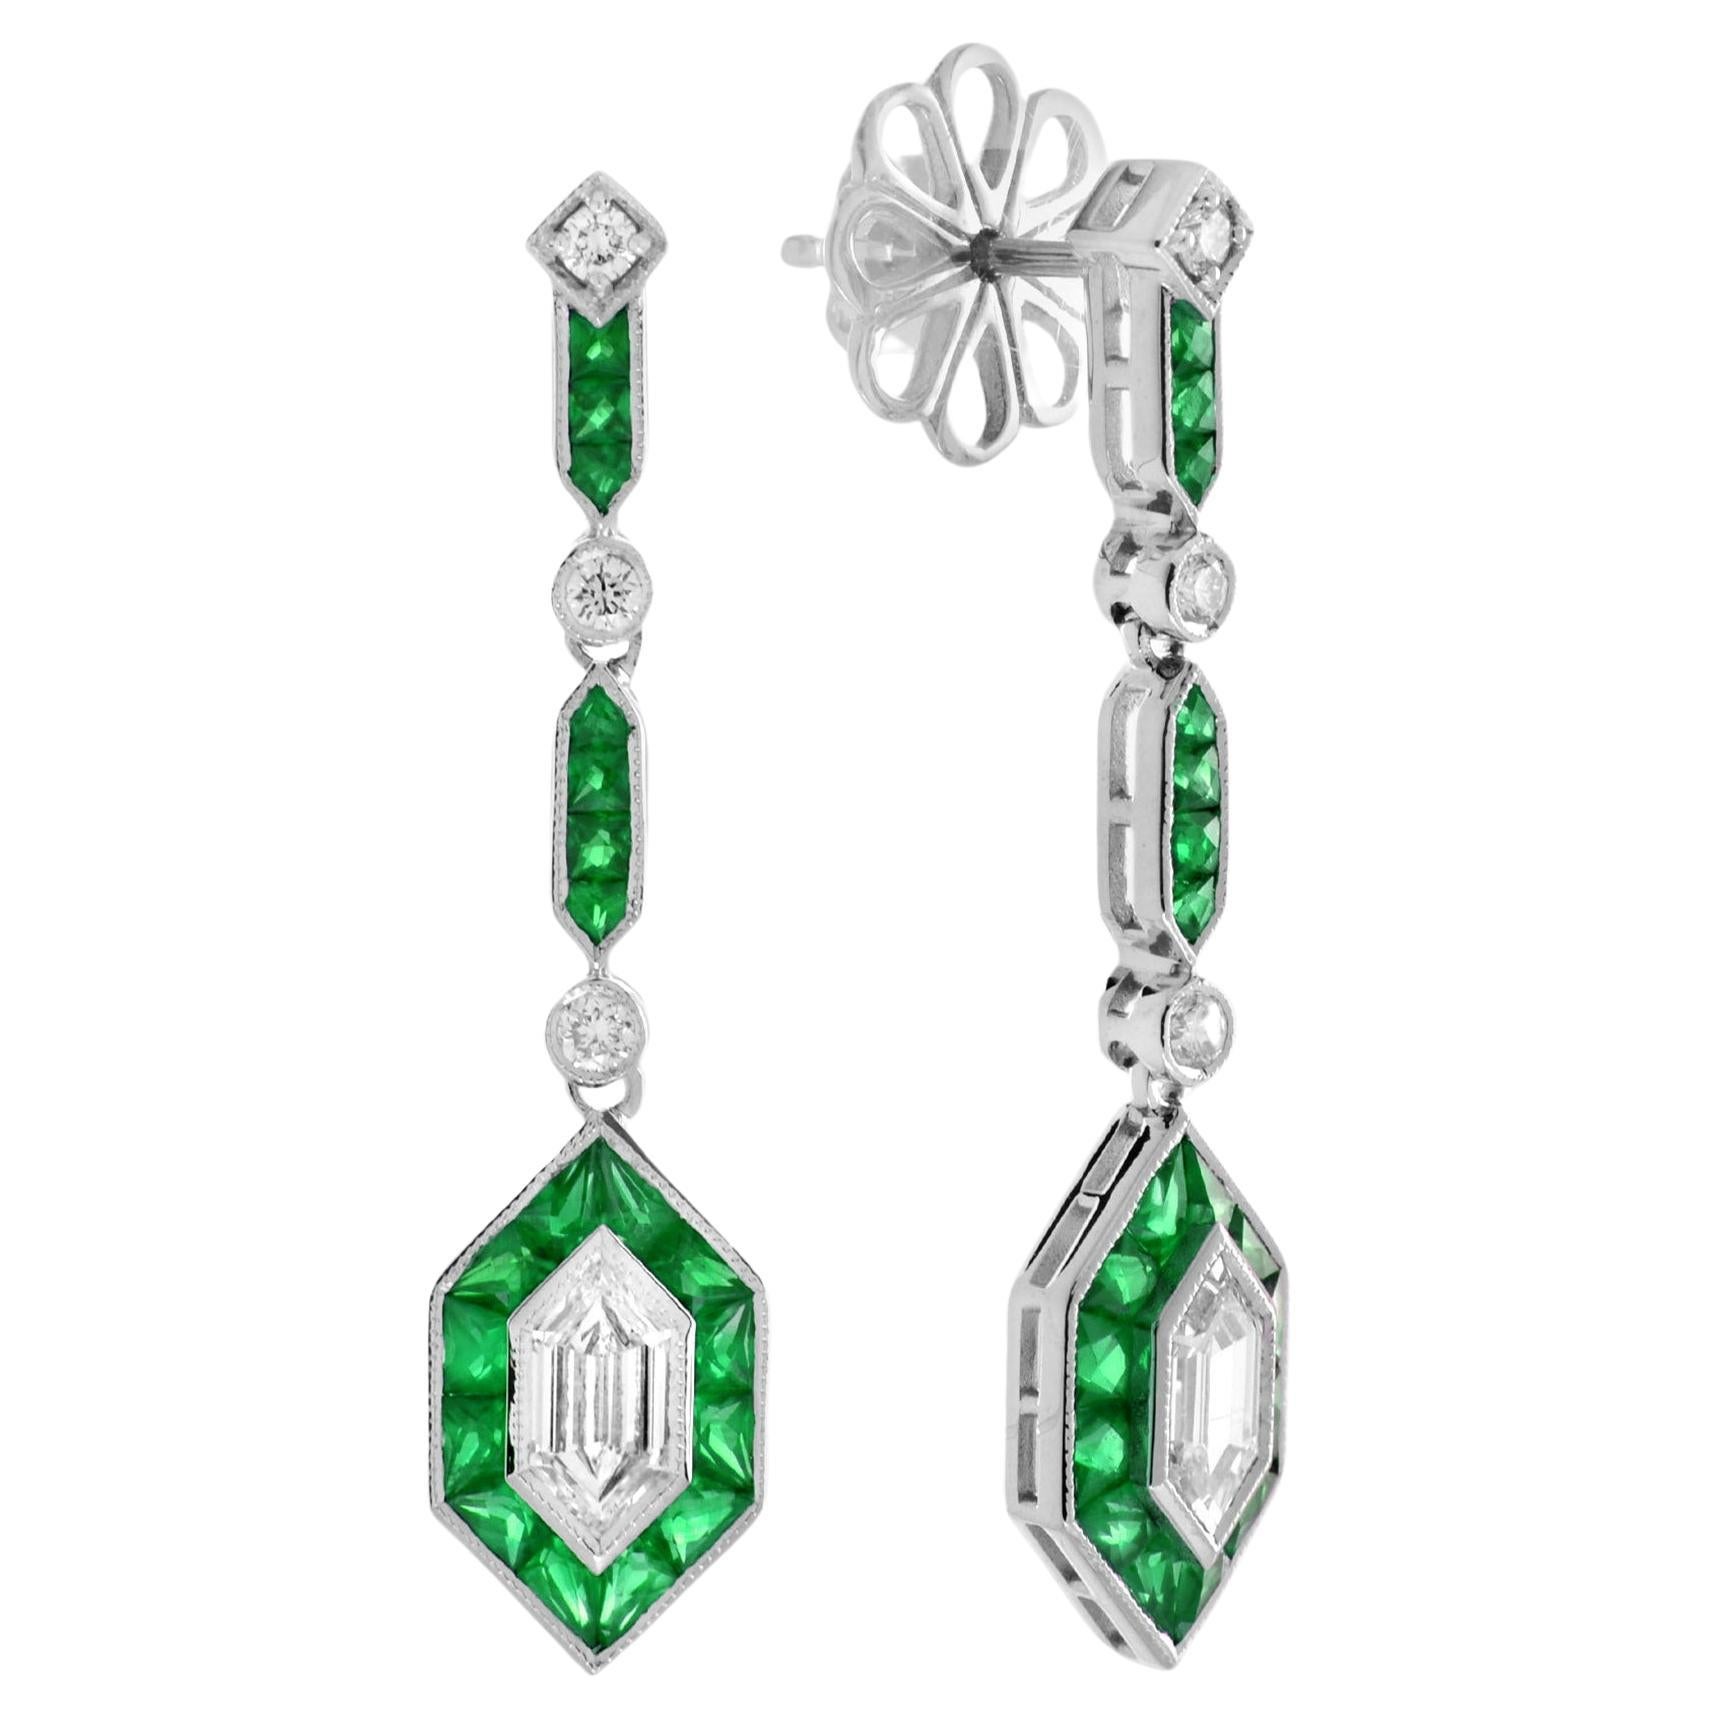 Bullet Diamond and Emerald Art Deco Style Drop Earrings in 18K White Gold